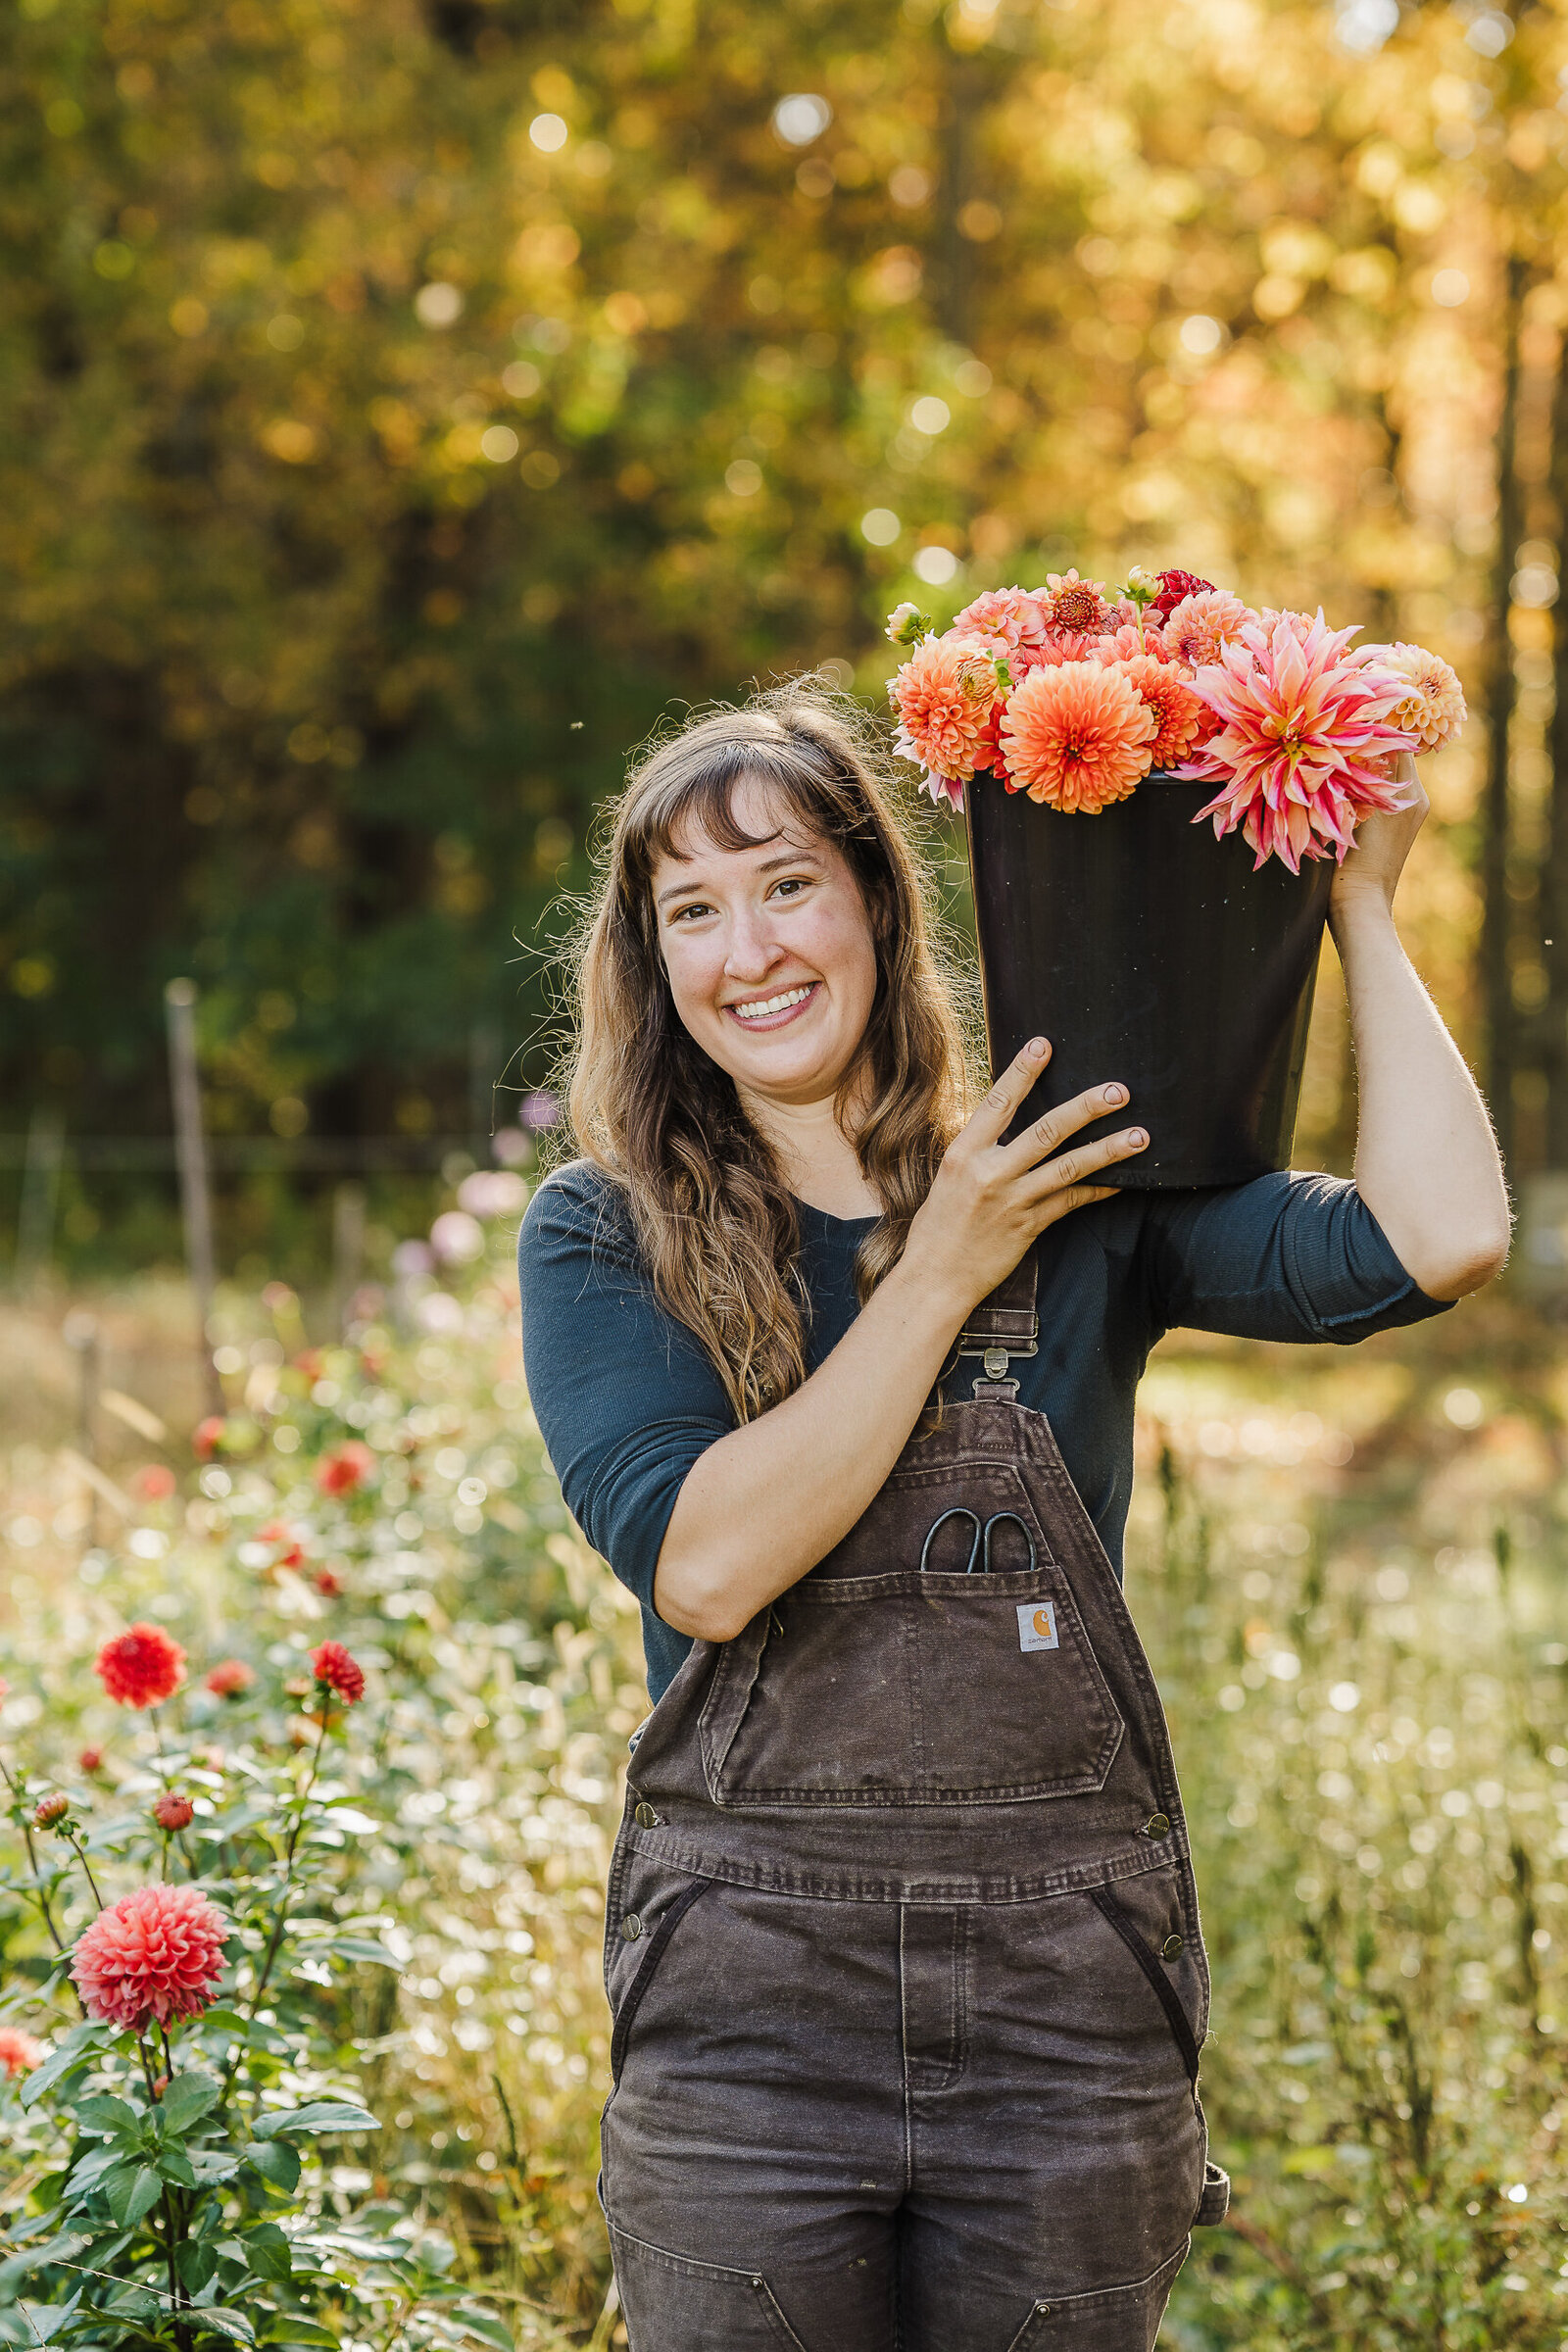 flower farmer poses with bucket of flowers during photoshoot